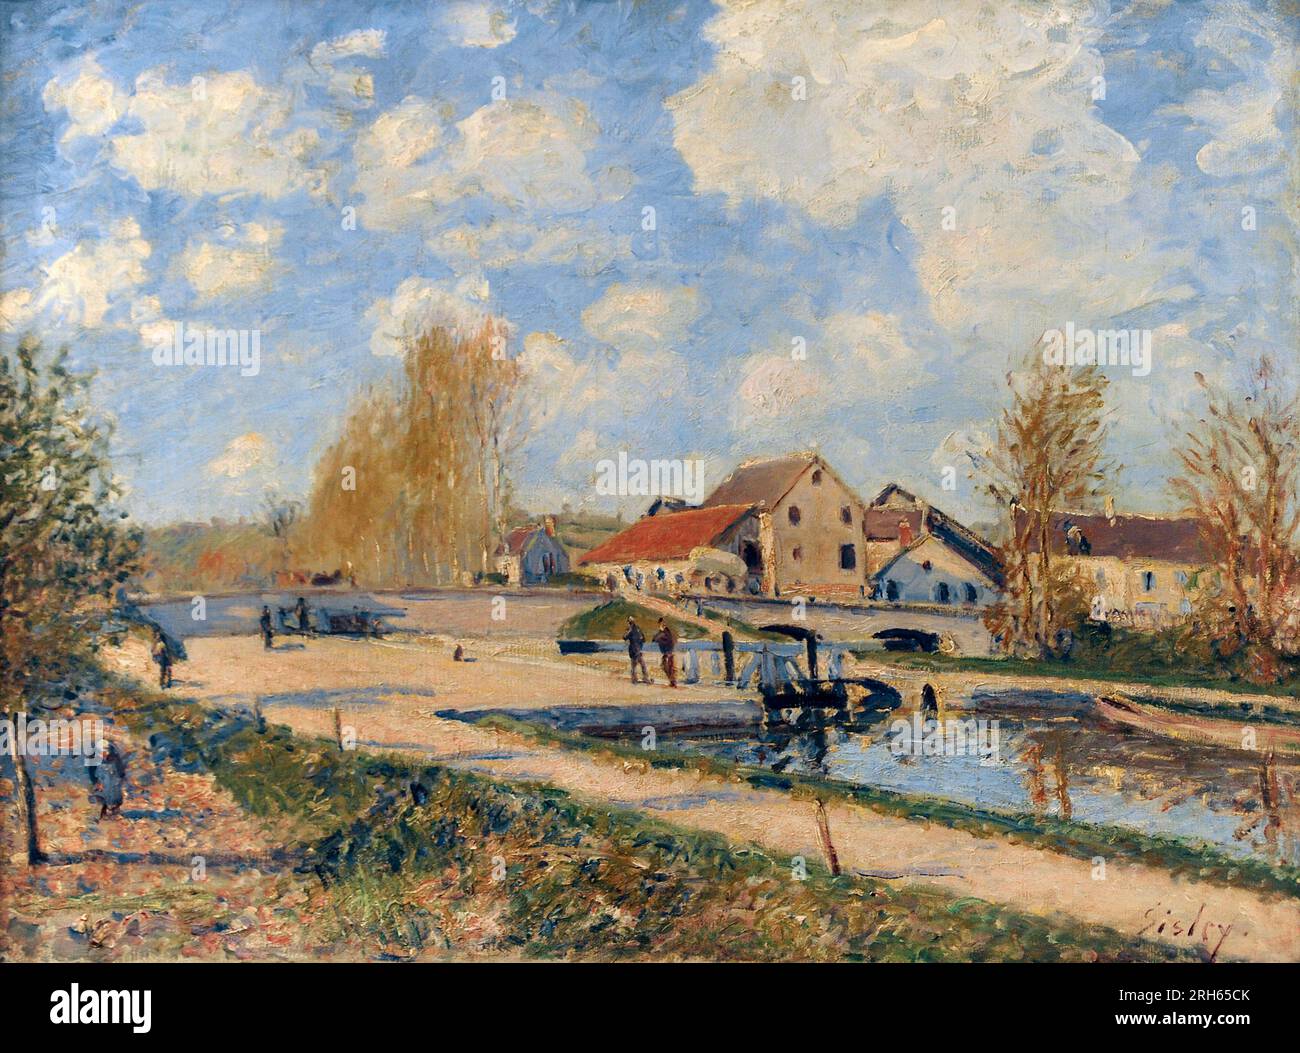 Alfred Sisley (1839-1899). French Impressionist painter. The Bourgogne lock at Moret, 1882. National Gallery, Prague, Czech Republic. Stock Photo